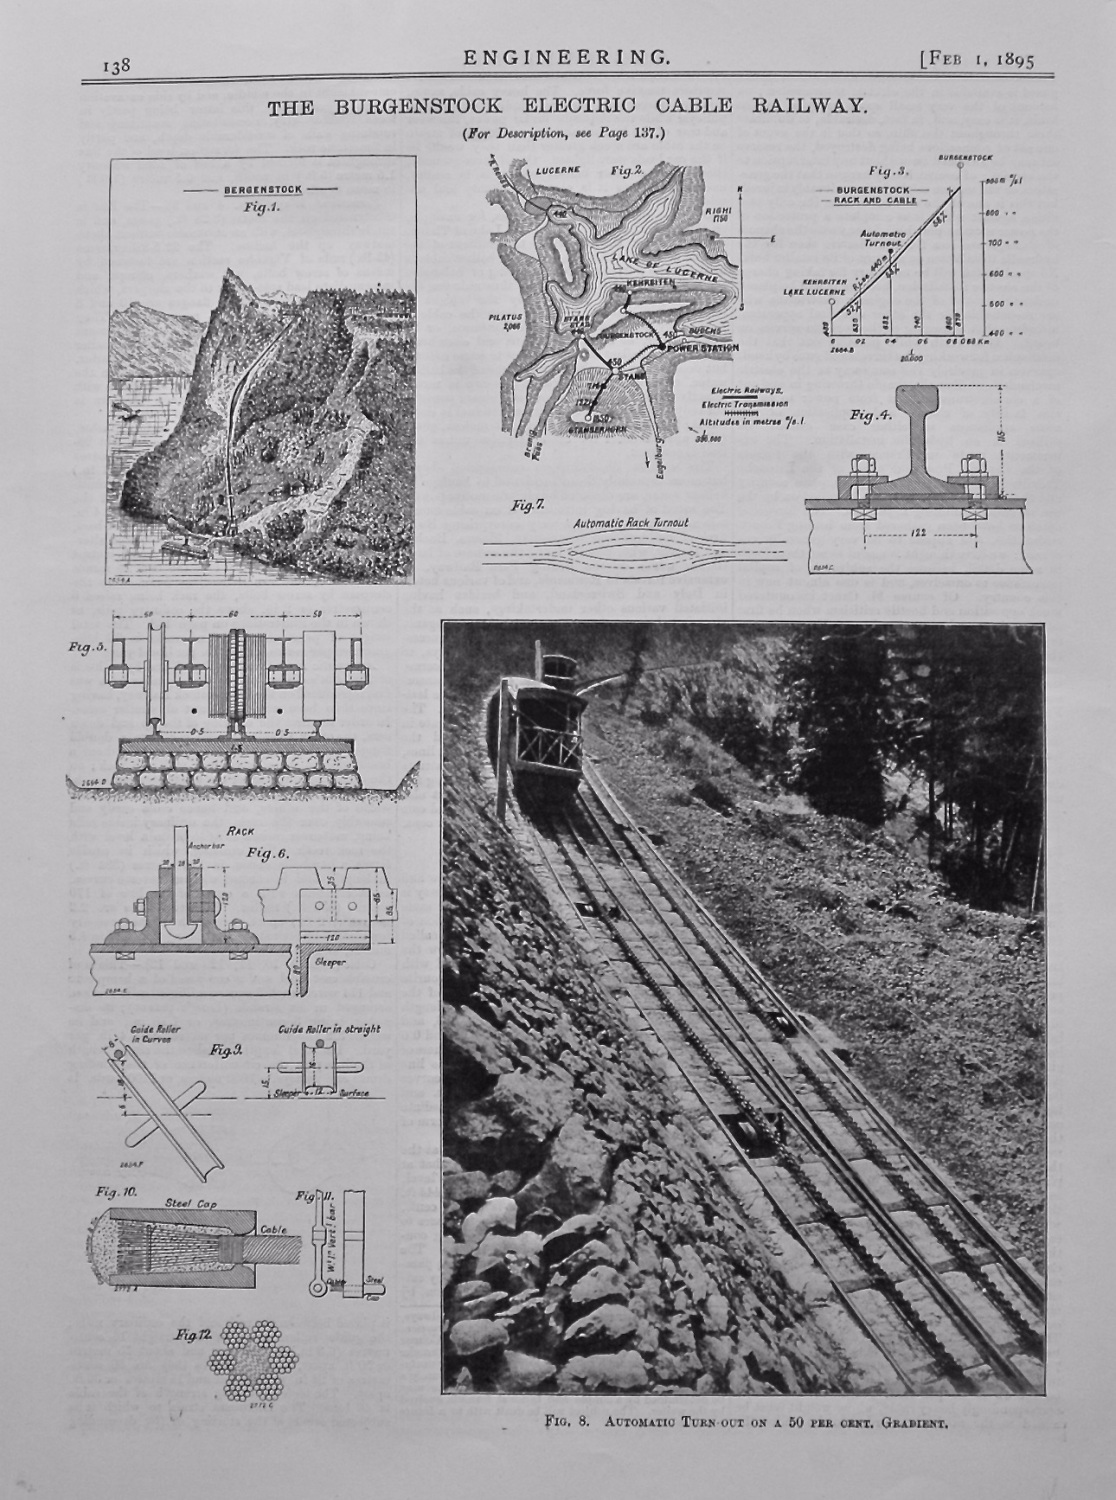 The Burgenstock Electric Cable Railway.  1895.